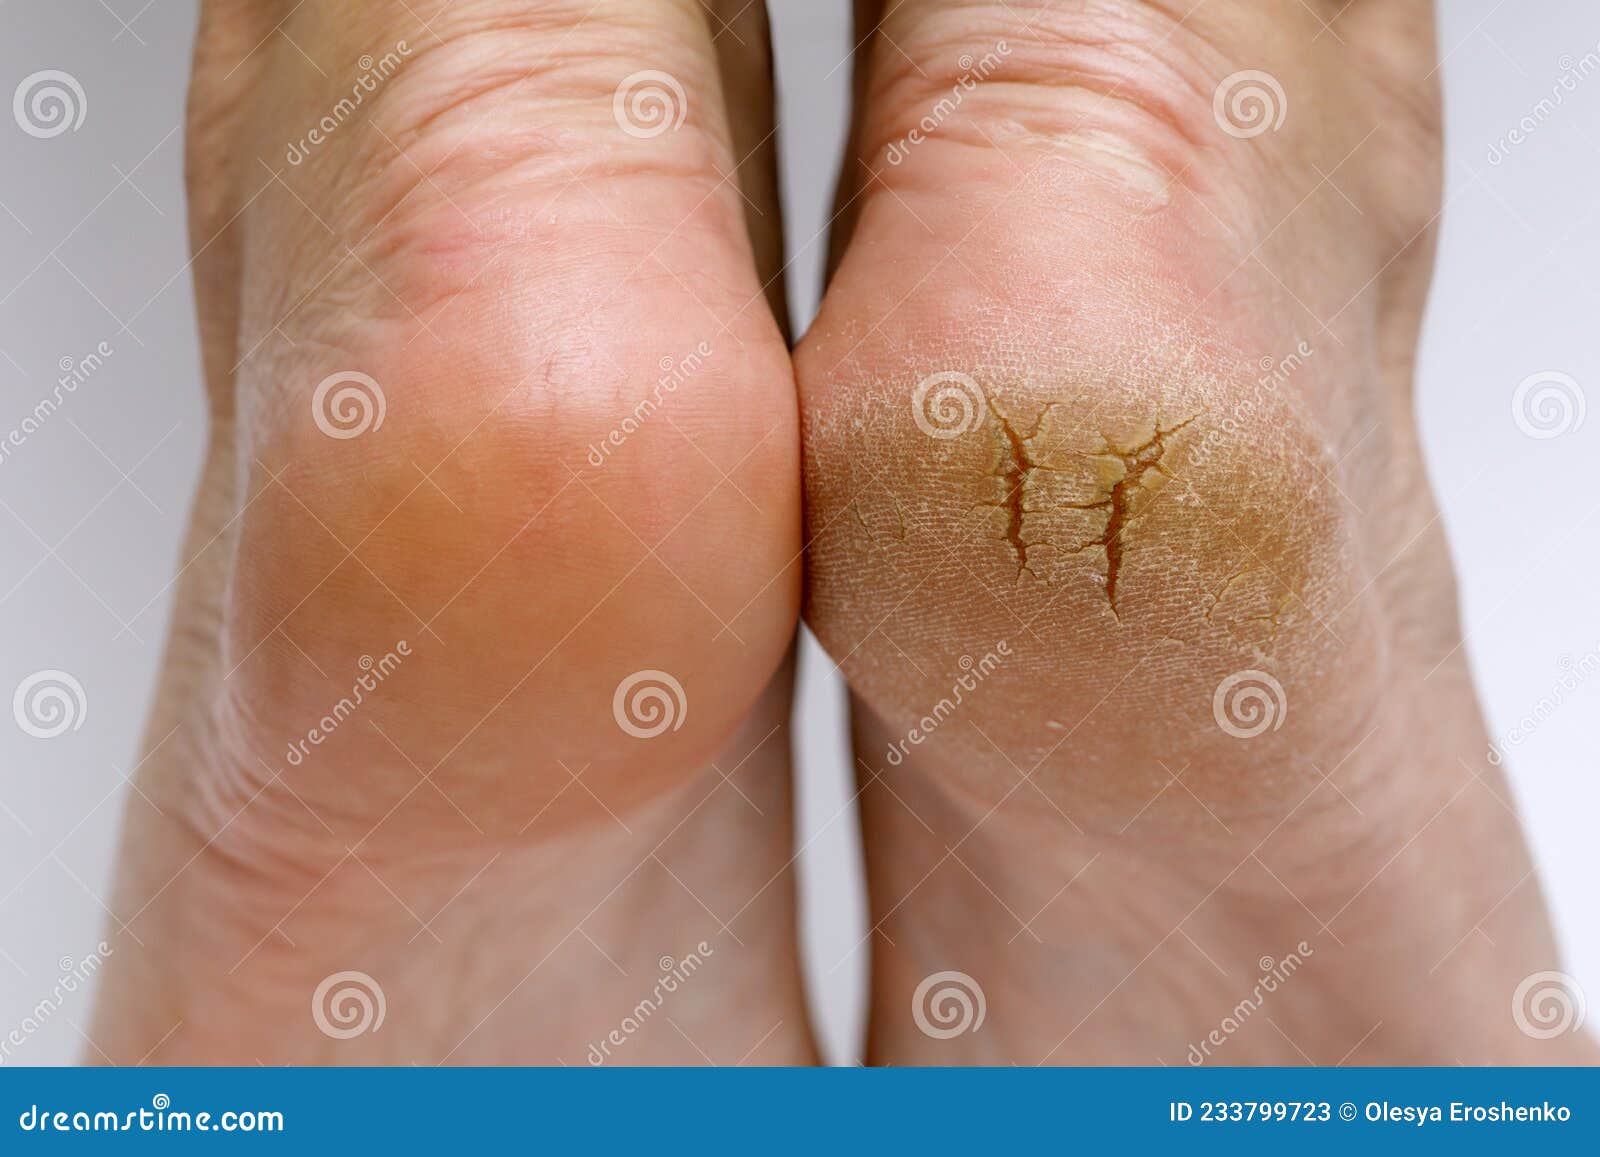 Dry, Cracked Heels? Frequently asked Questions. - Goldman Dermatology